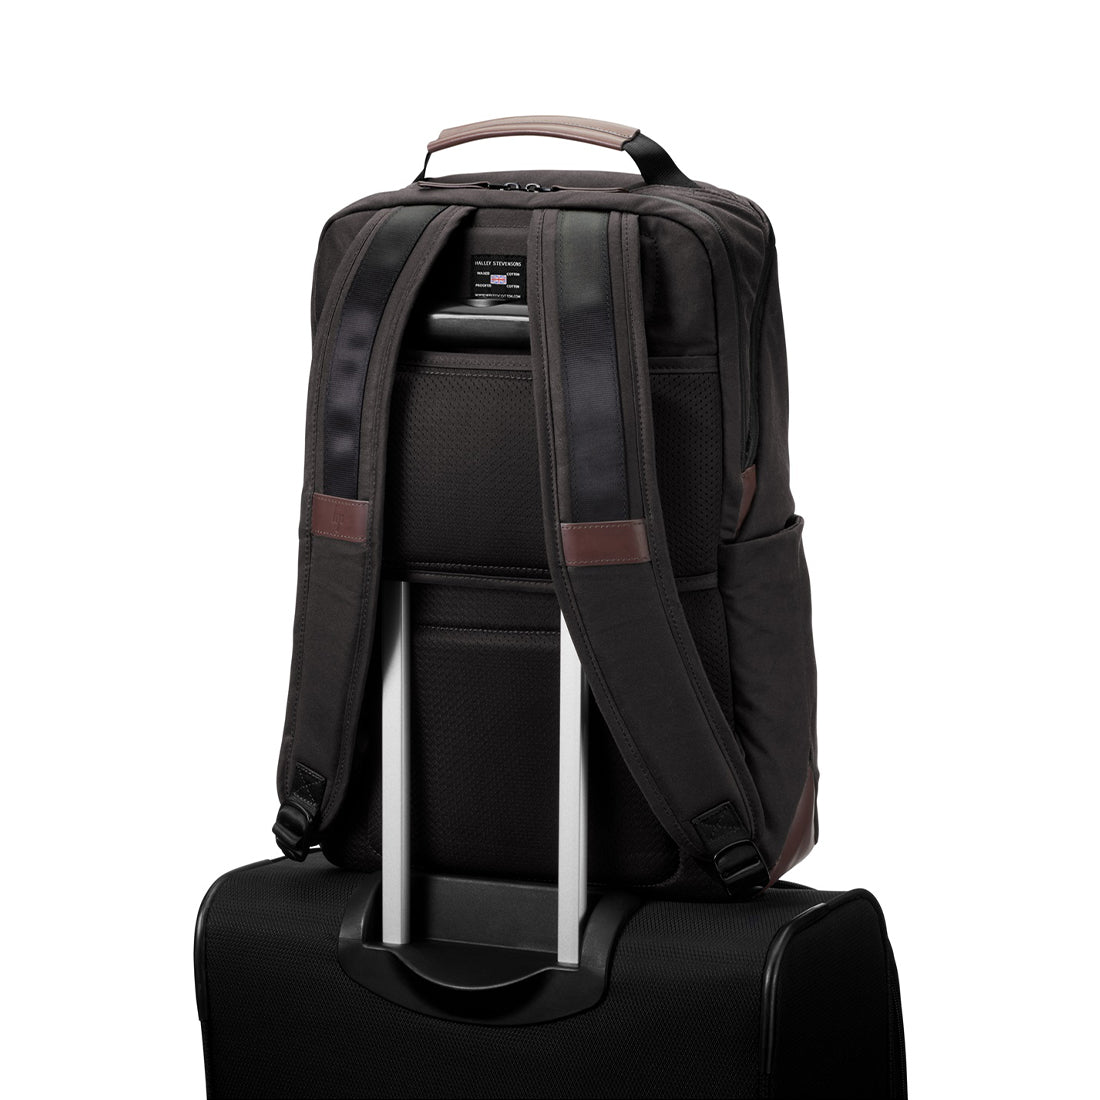 HP Spectre Folio Backpack for 15.6 Inch Laptops with RFID Pockets and Water Resistant Material